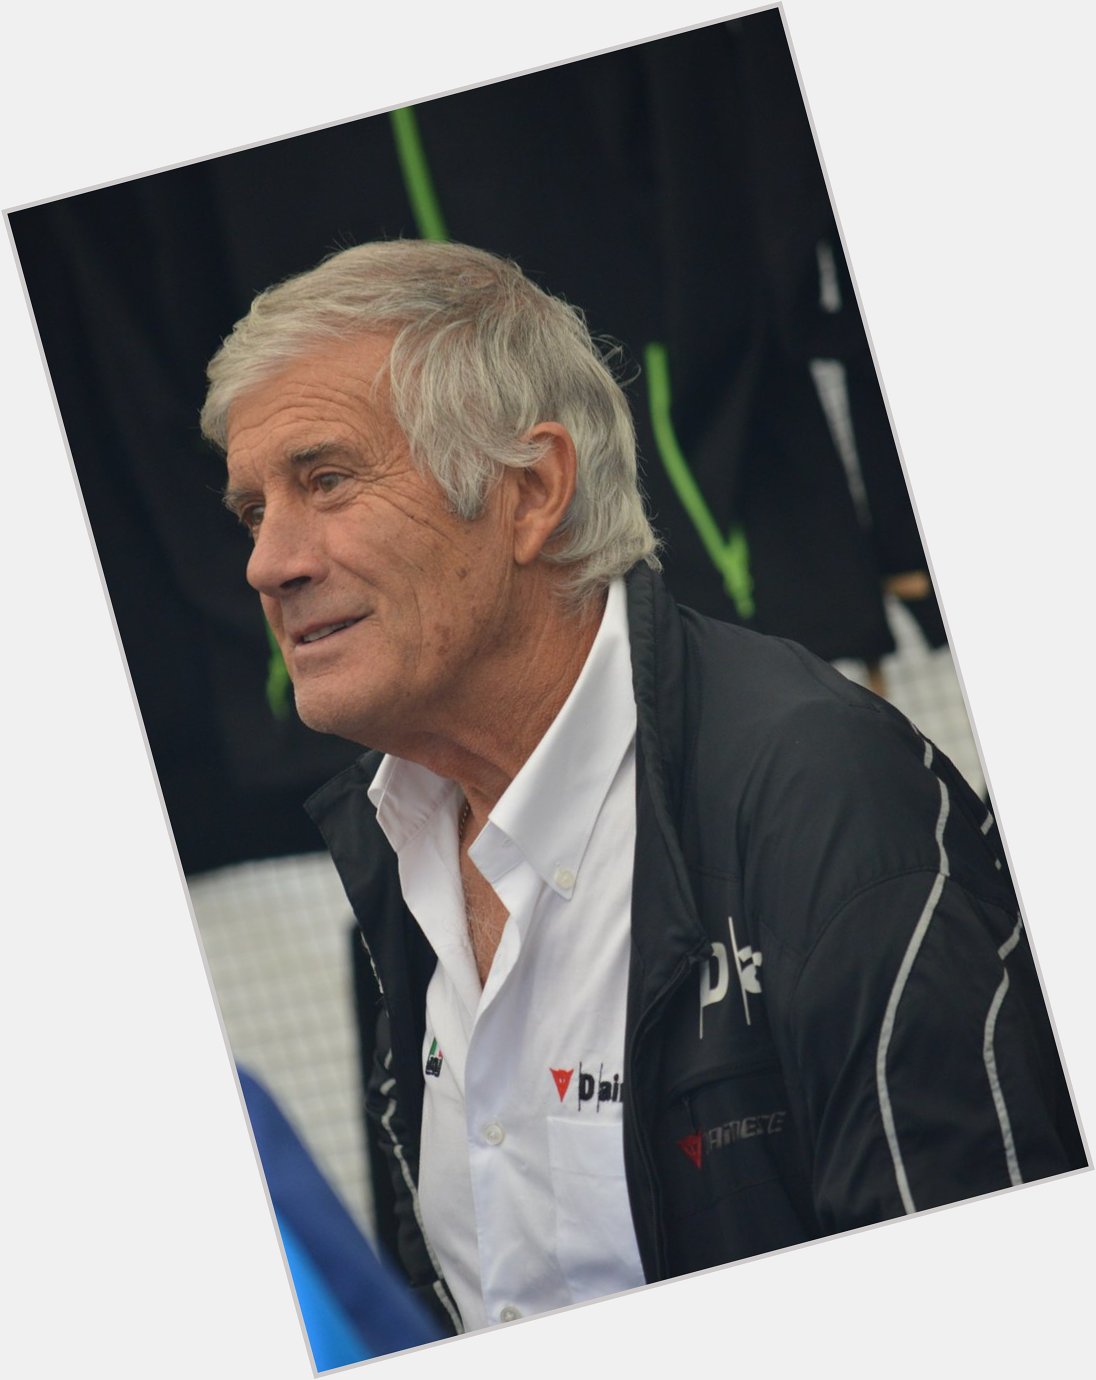 Happy Birthday Giacomo Agostini

Seen here at the 2016 Gold Cup at Oliver\s Mount 